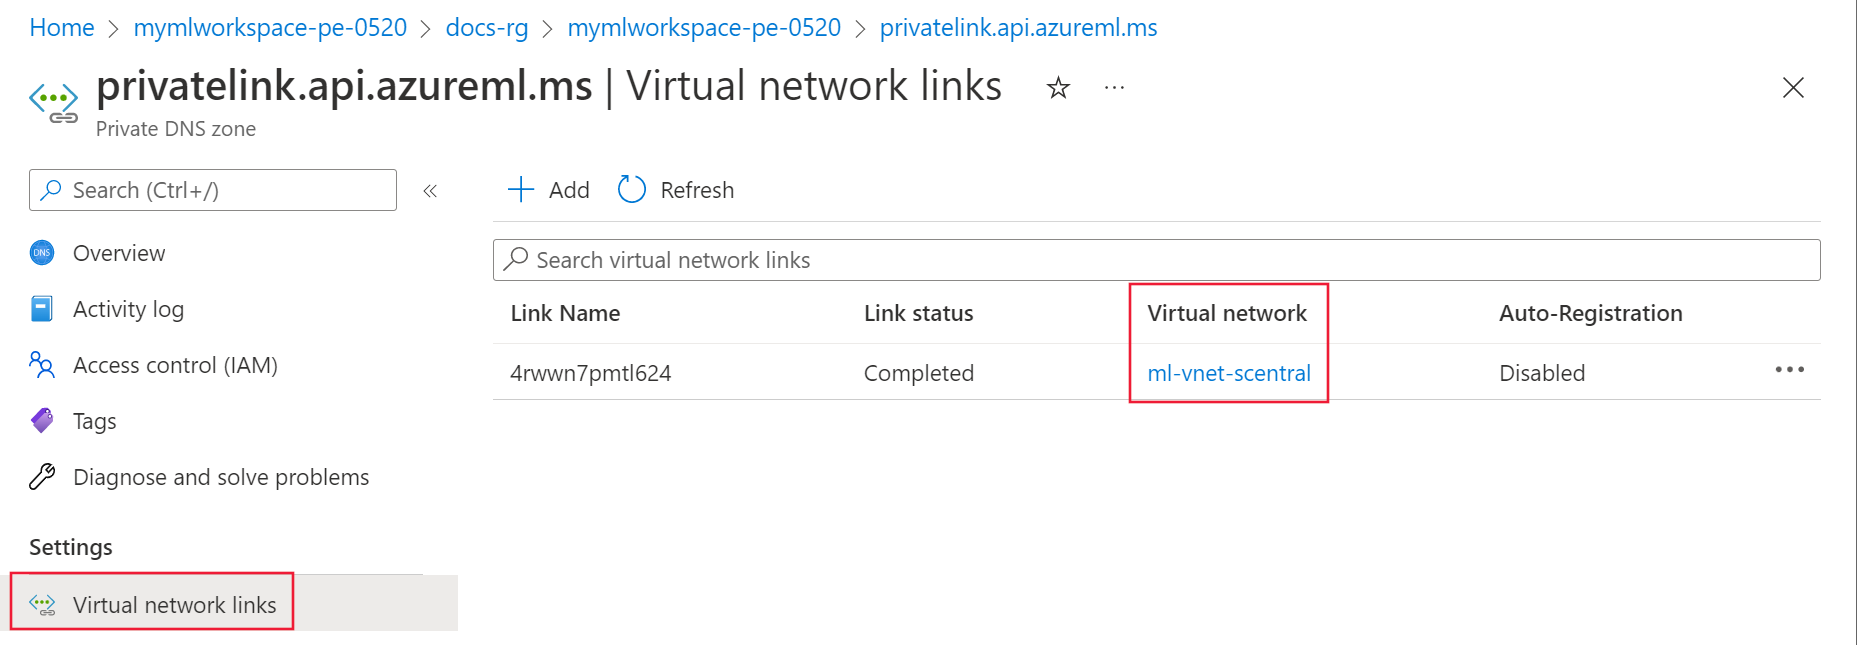 Screenshot of the virtual network links for the Private DNS zone.